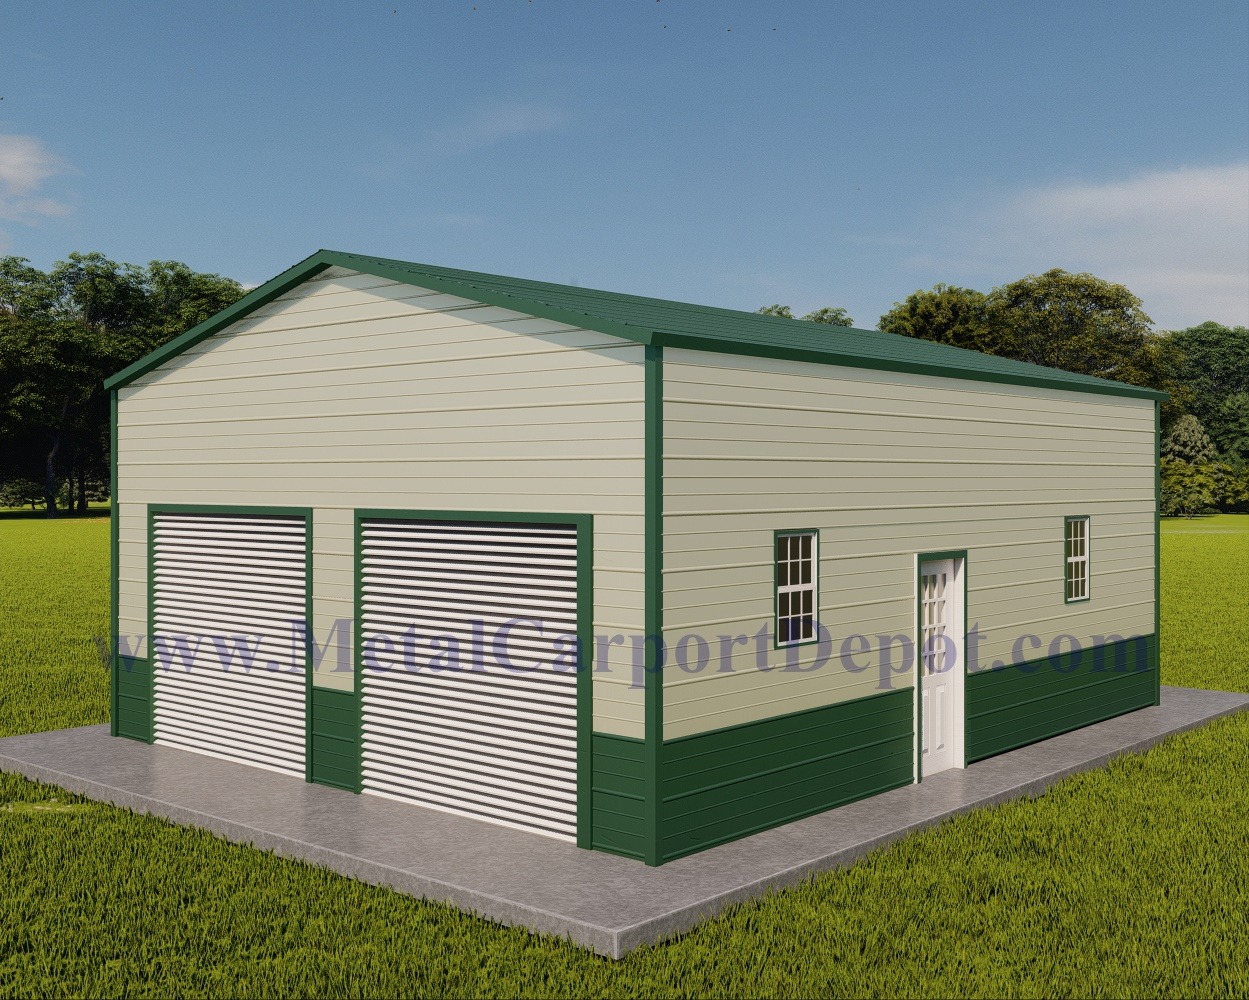 Metal Enclosed Garage Image With Green Roof, Green Trim, and White Walls. Also shown with lower 3' Green Wainscot on bottom